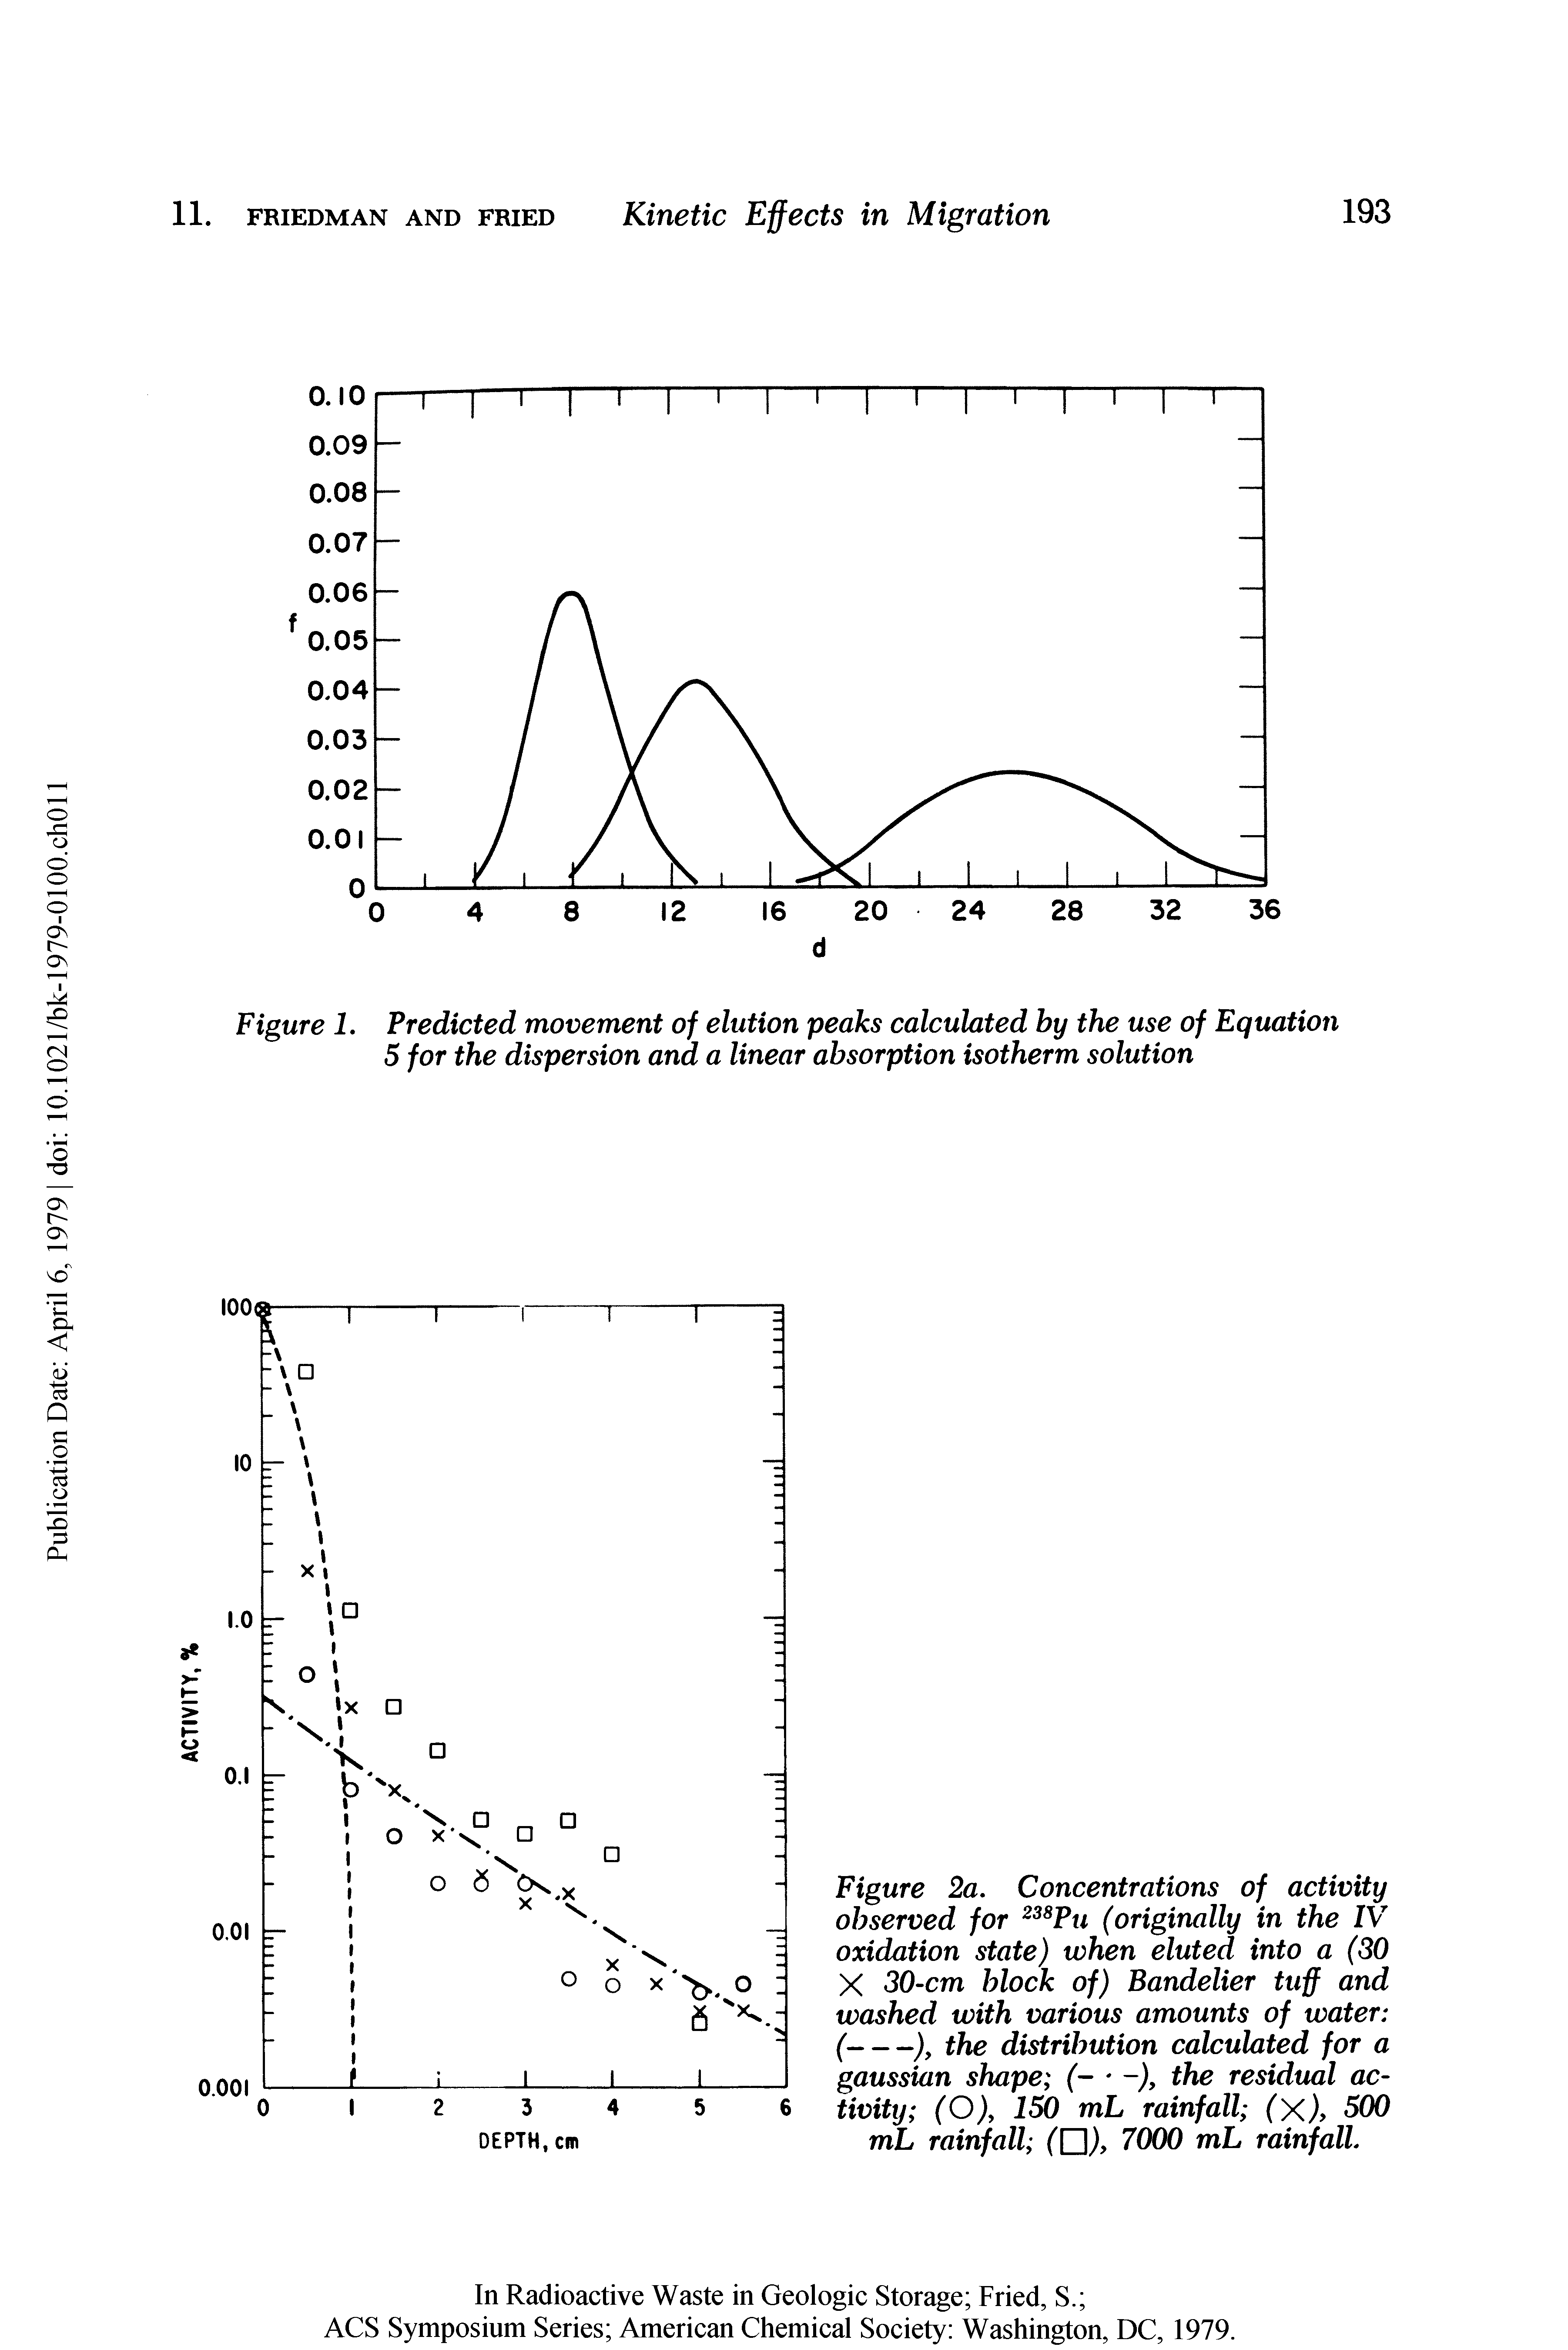 Figure 1. Predicted movement of elution peaks calculated by the use of Equation 5 for the dispersion and a linear absorption isotherm solution...